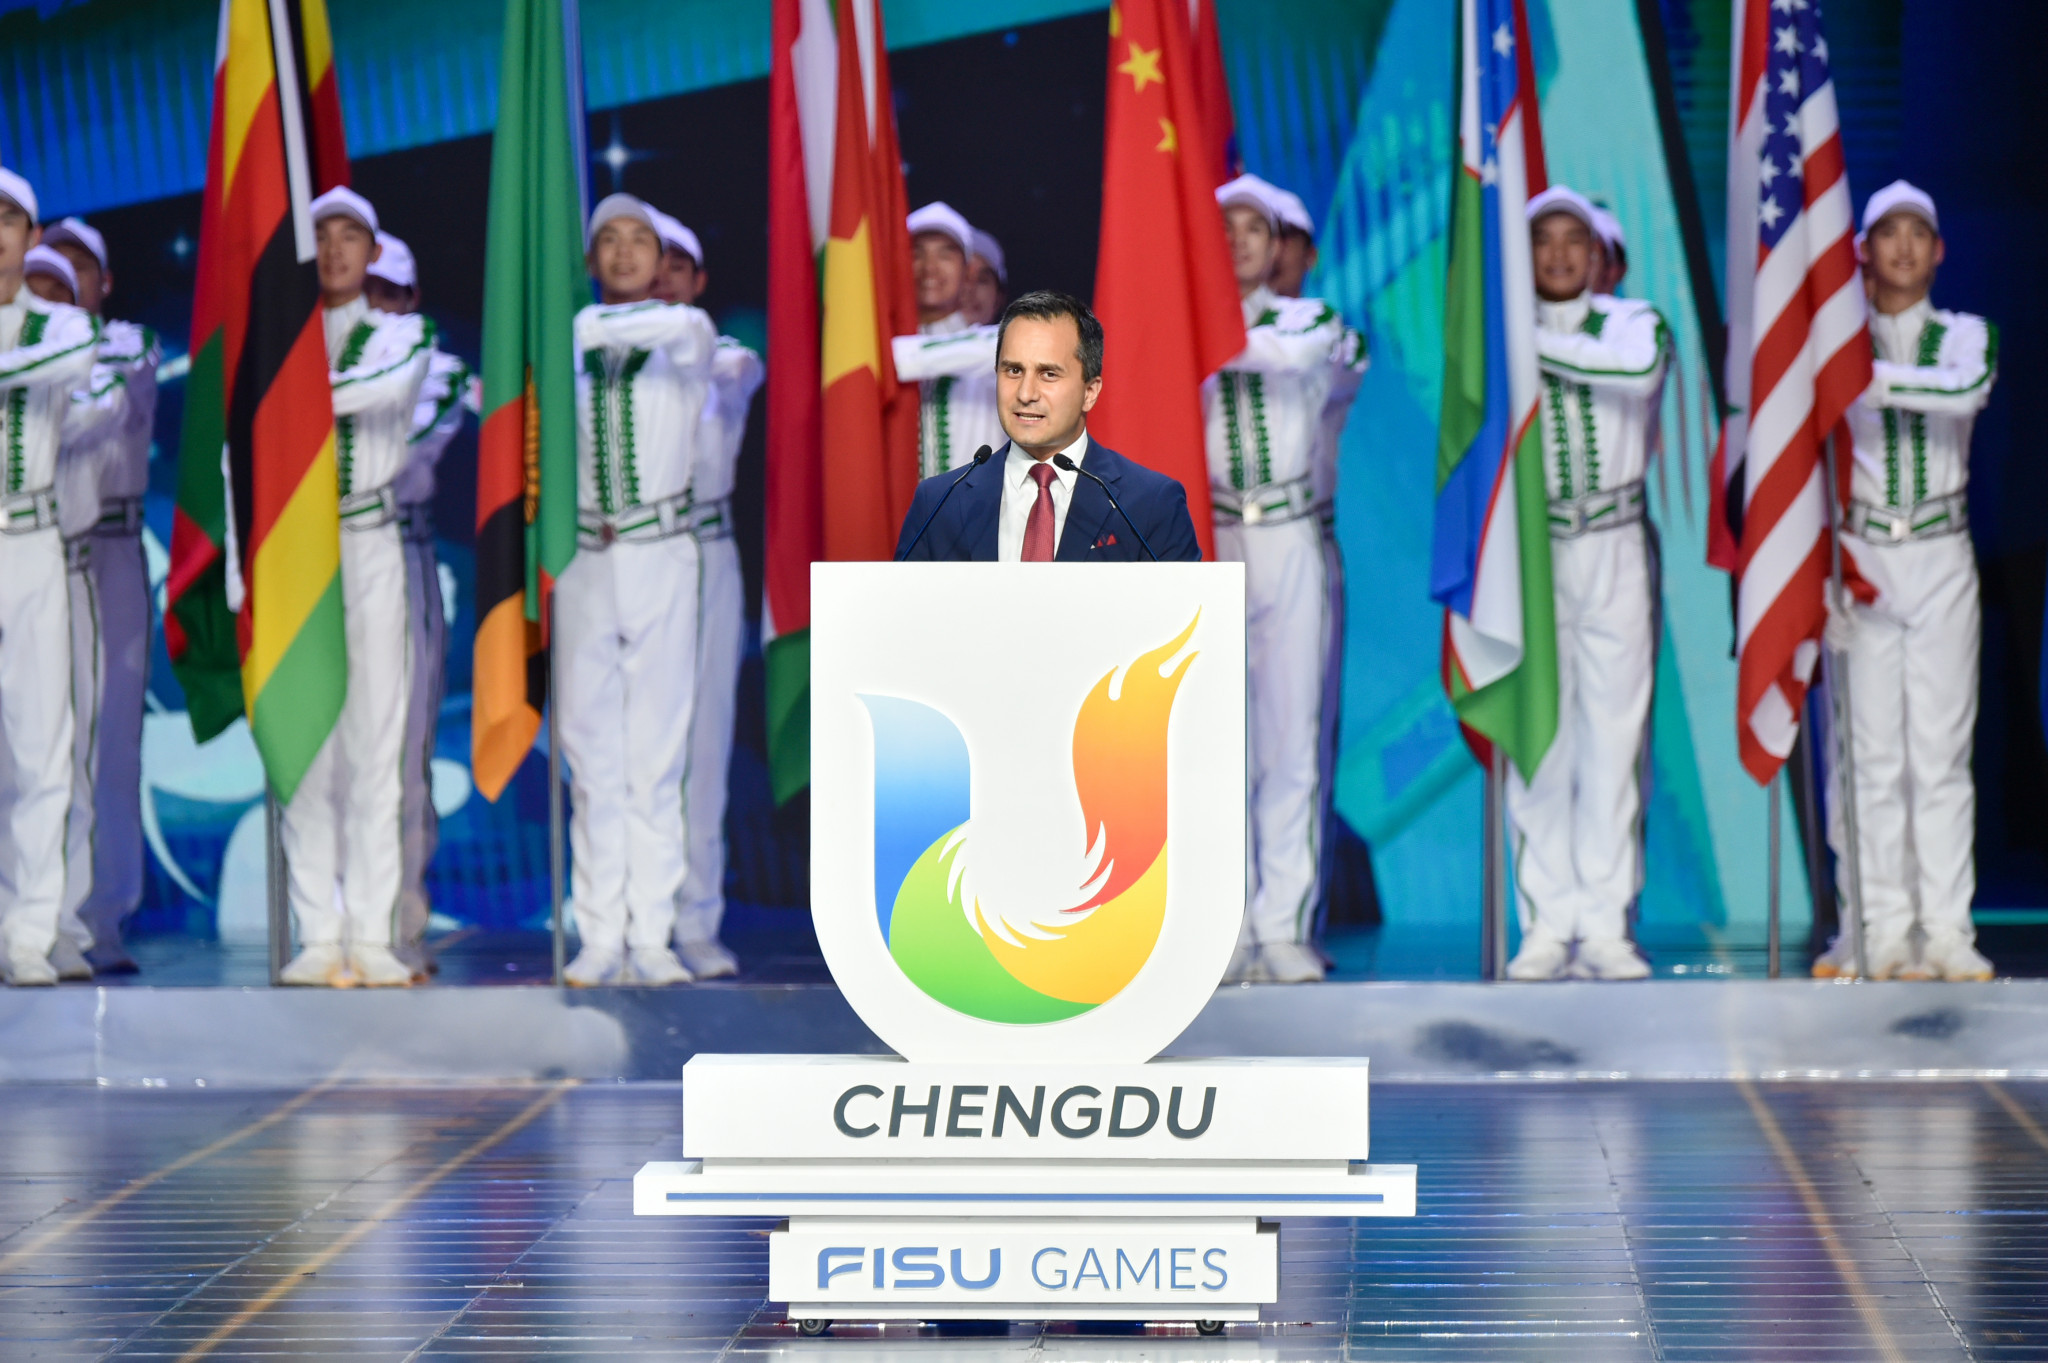 Mahmut Ozdemir, member of the German Bundestag and Parliamentary State Secretary in the Federal Ministry of the Interior and Community of Germany, speaks during the Closing Ceremony ©FISU